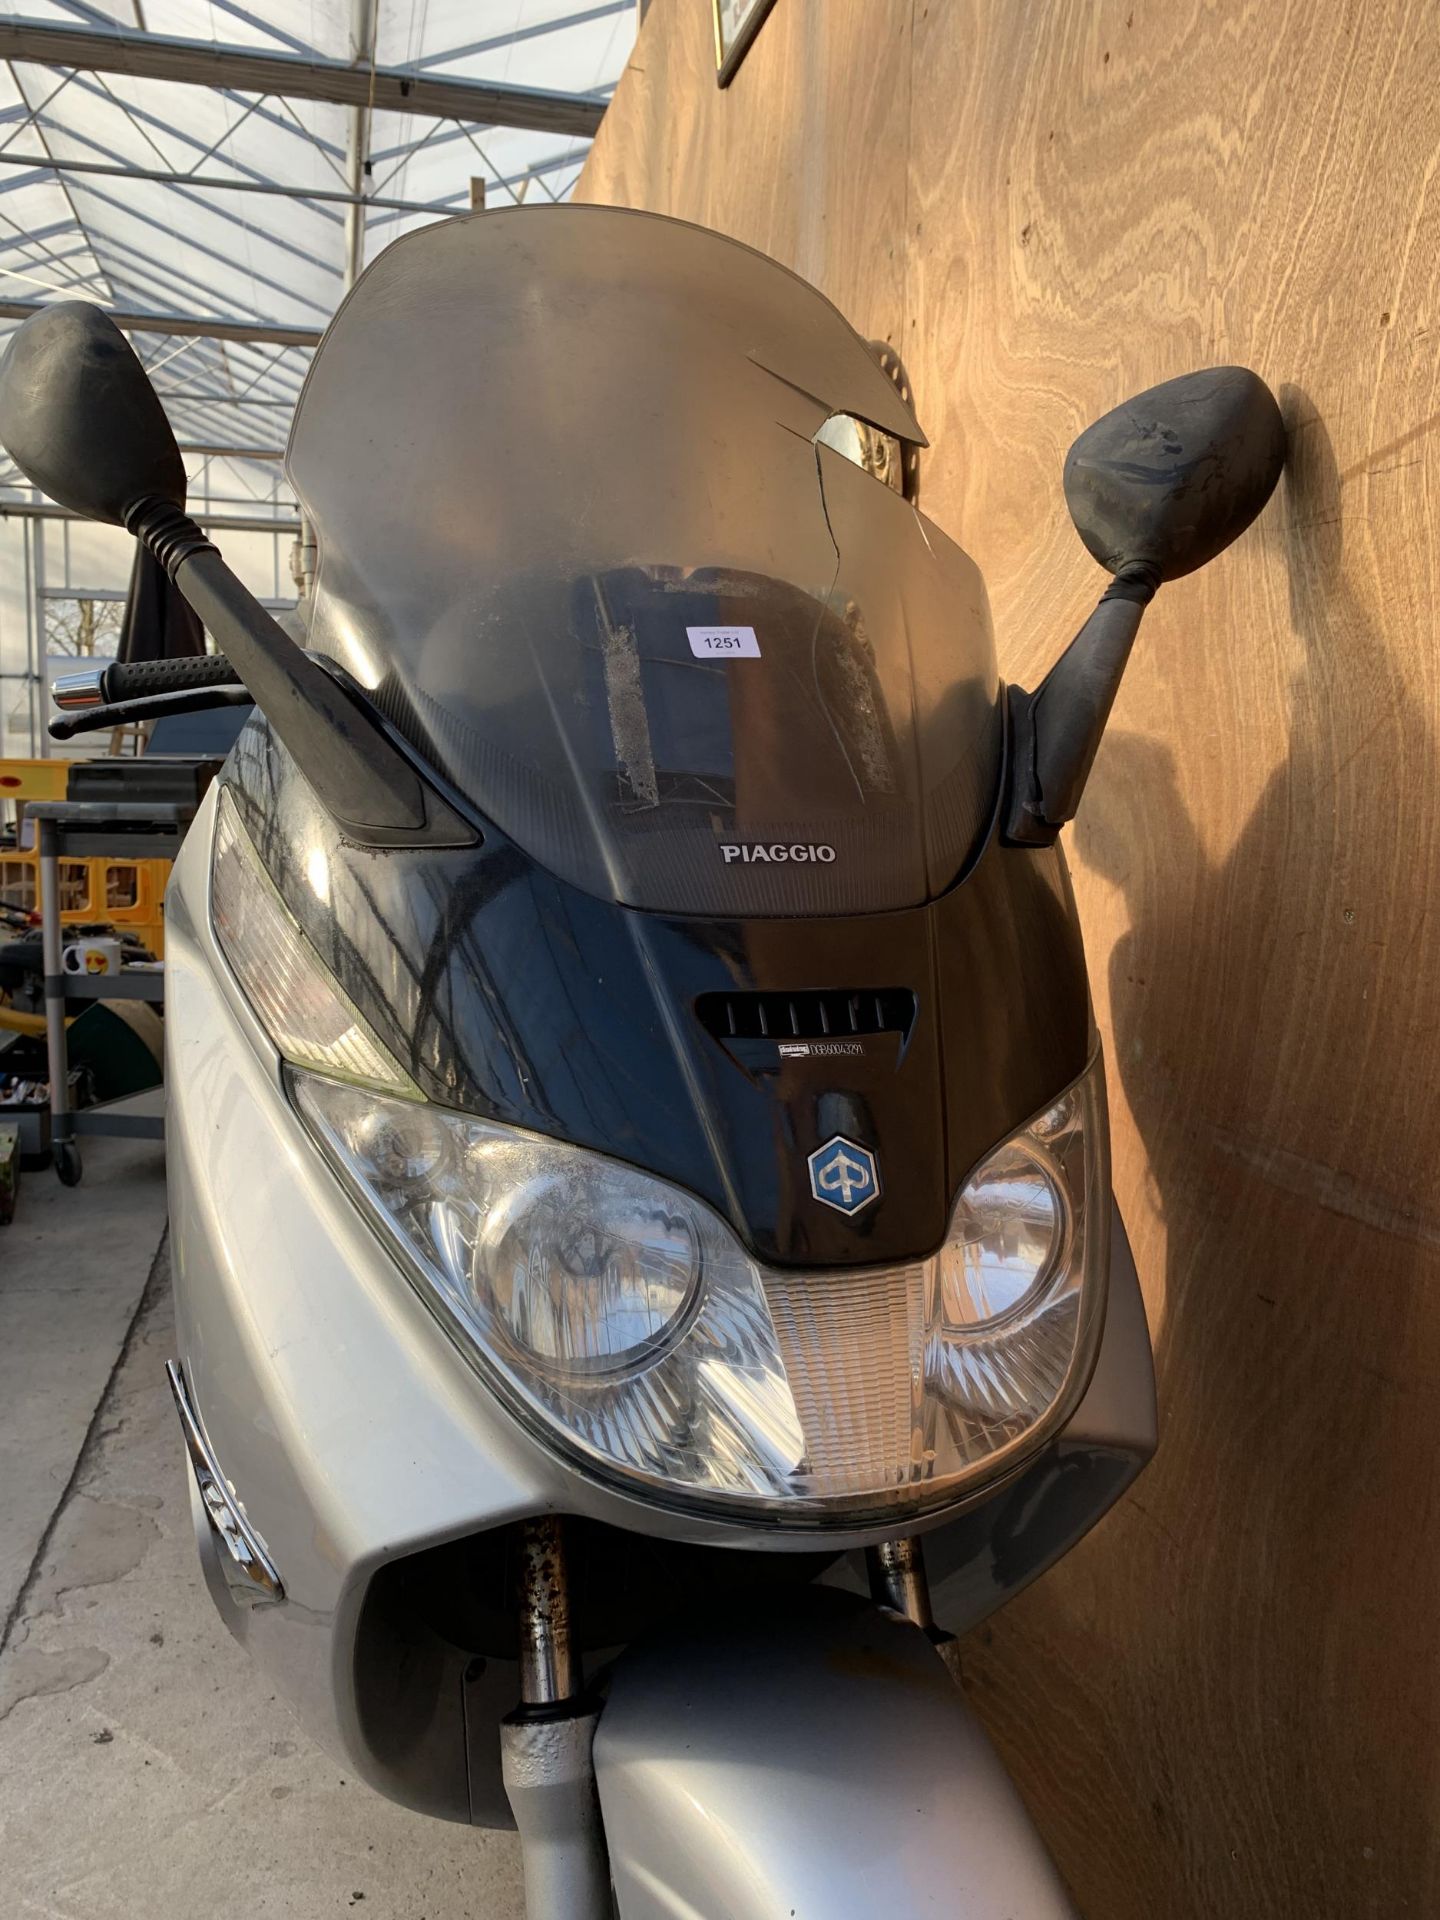 A PIAGGIO SCOOTER SOLD AS SEEN WITH NO PAPERWORK OR KEY AND DAMAGE TO THE LEFT HAND SIDE - Image 7 of 7